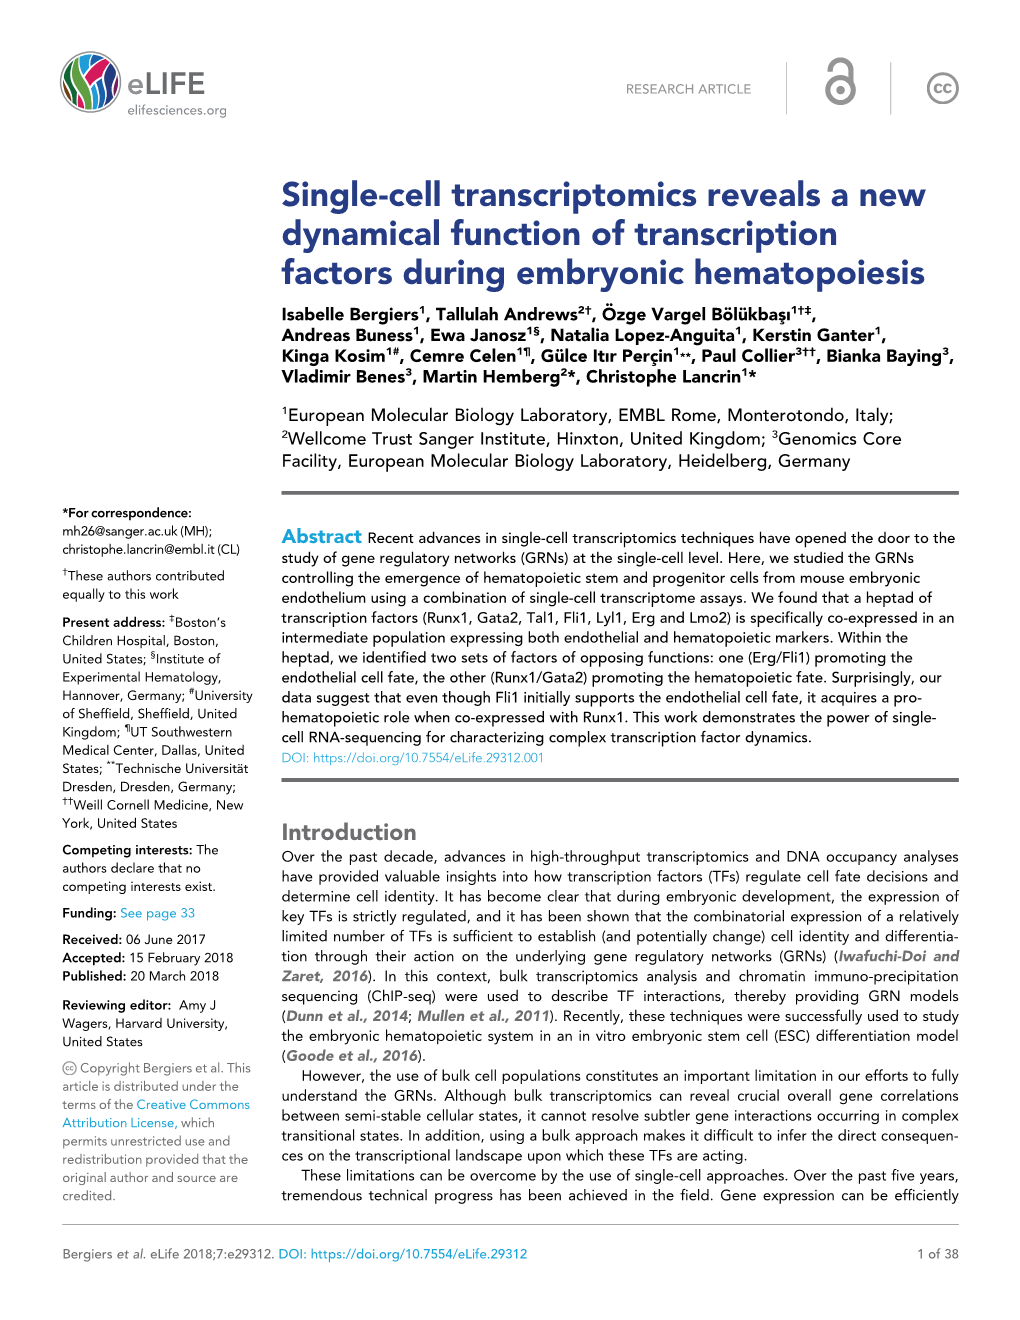 Single-Cell Transcriptomics Reveals a New Dynamical Function Of